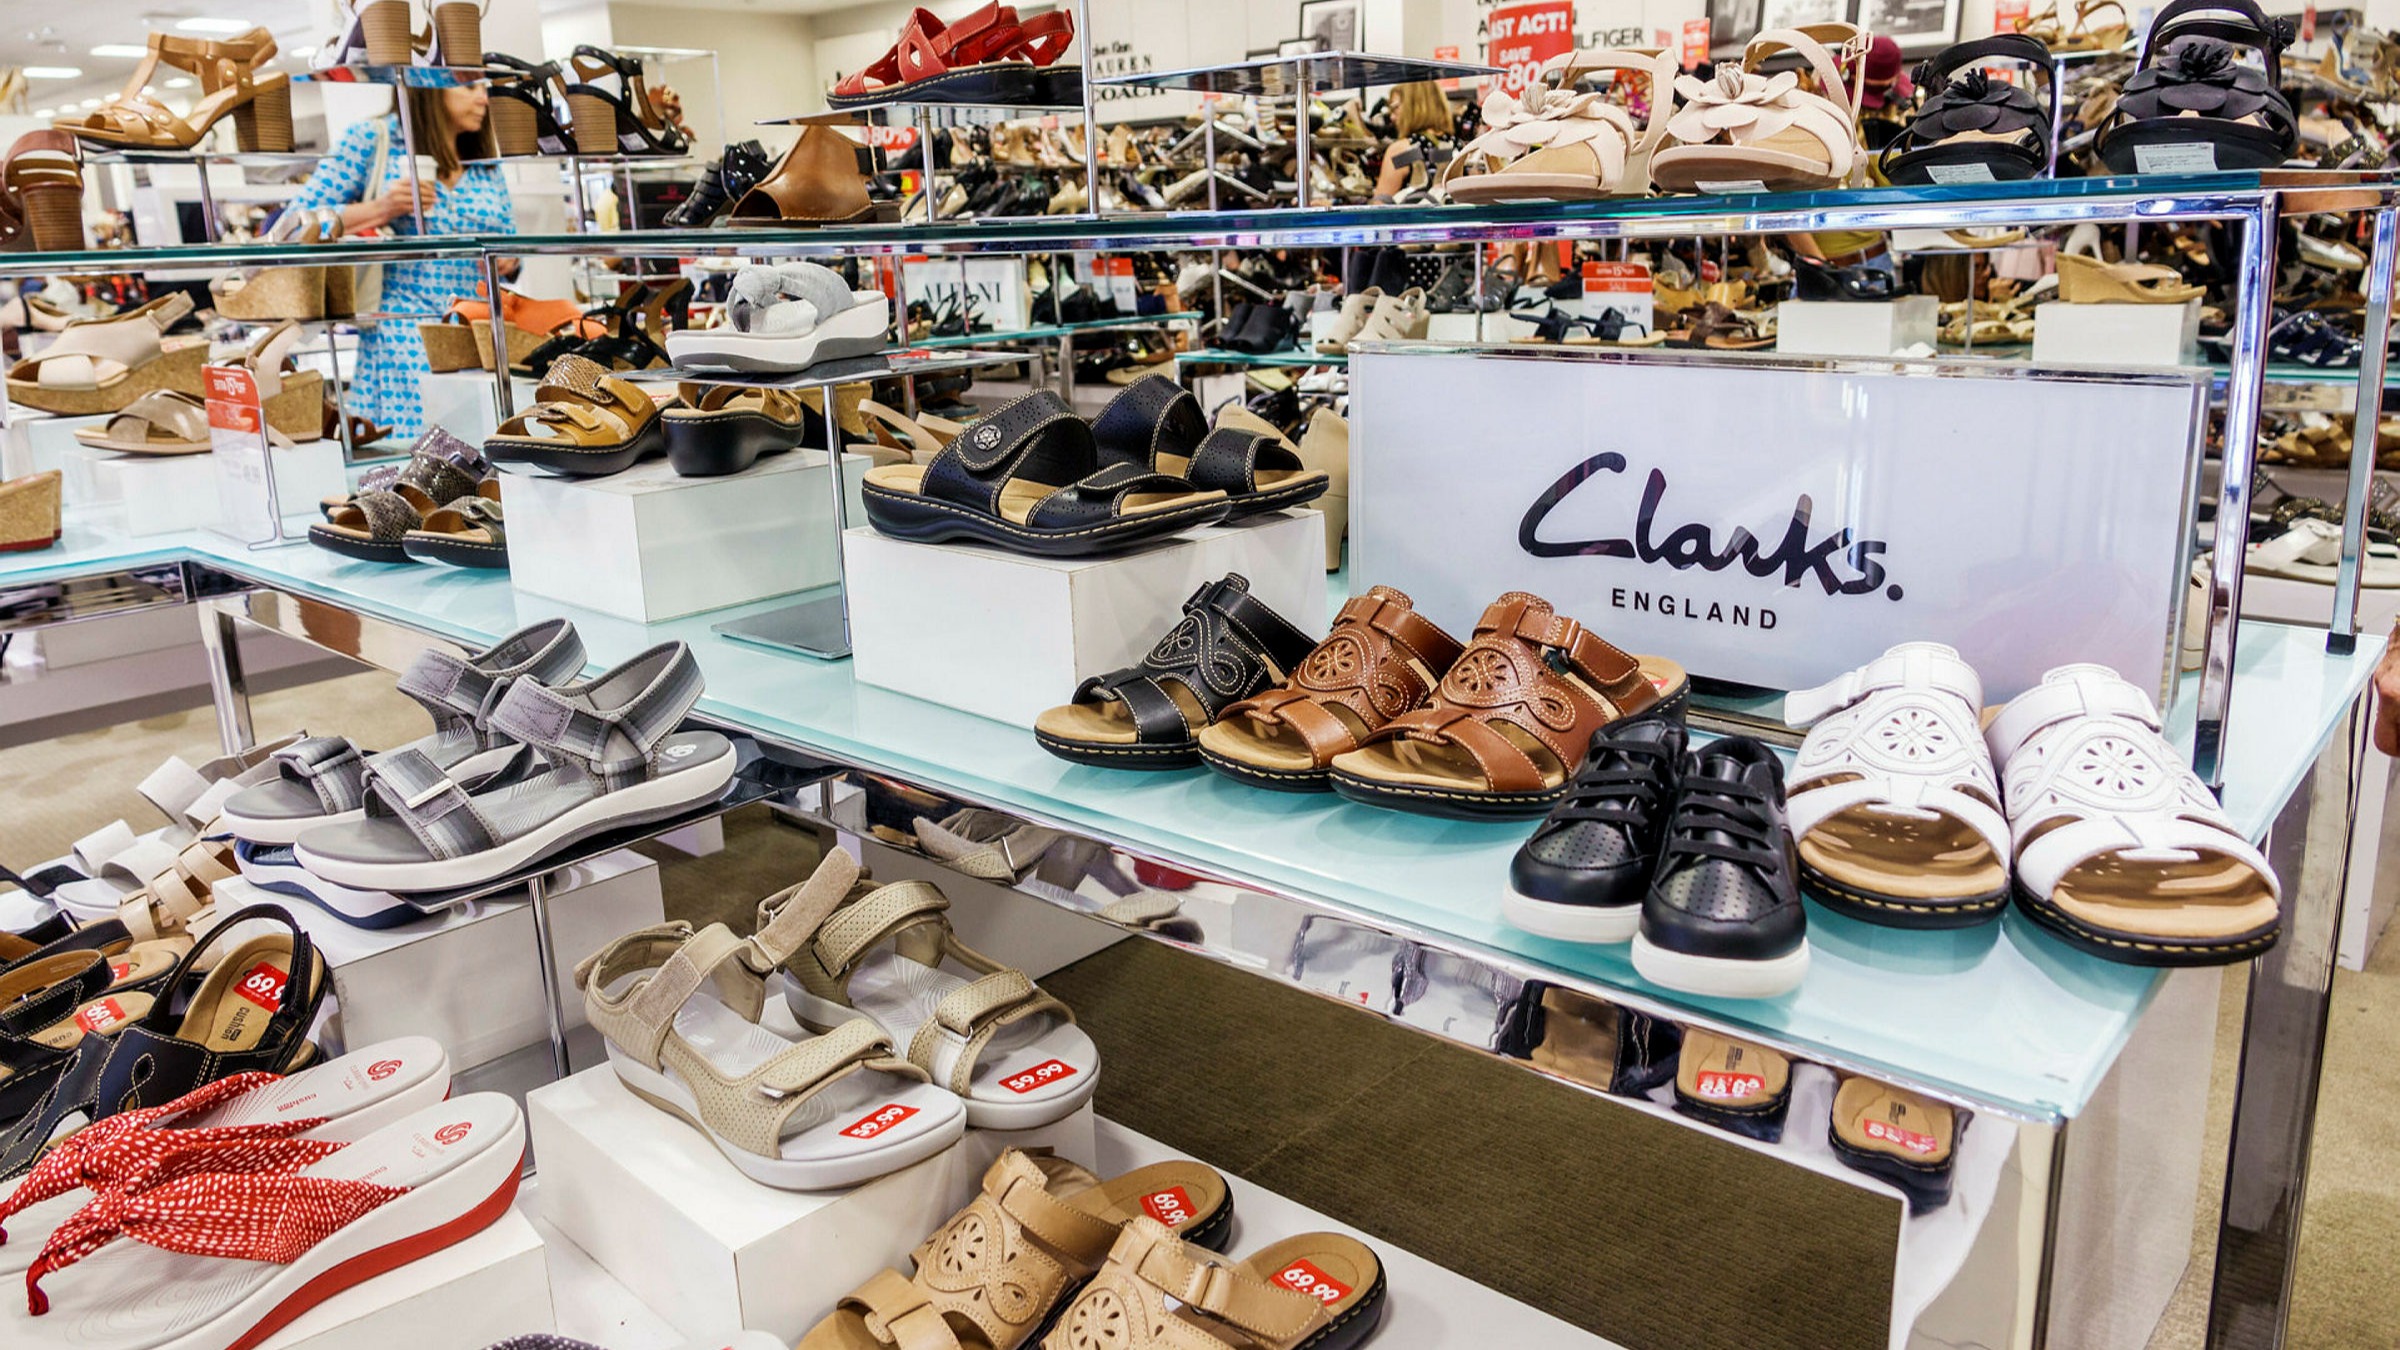 vores Slumber Goodwill Clarks agrees £100m private equity deal | Financial Times